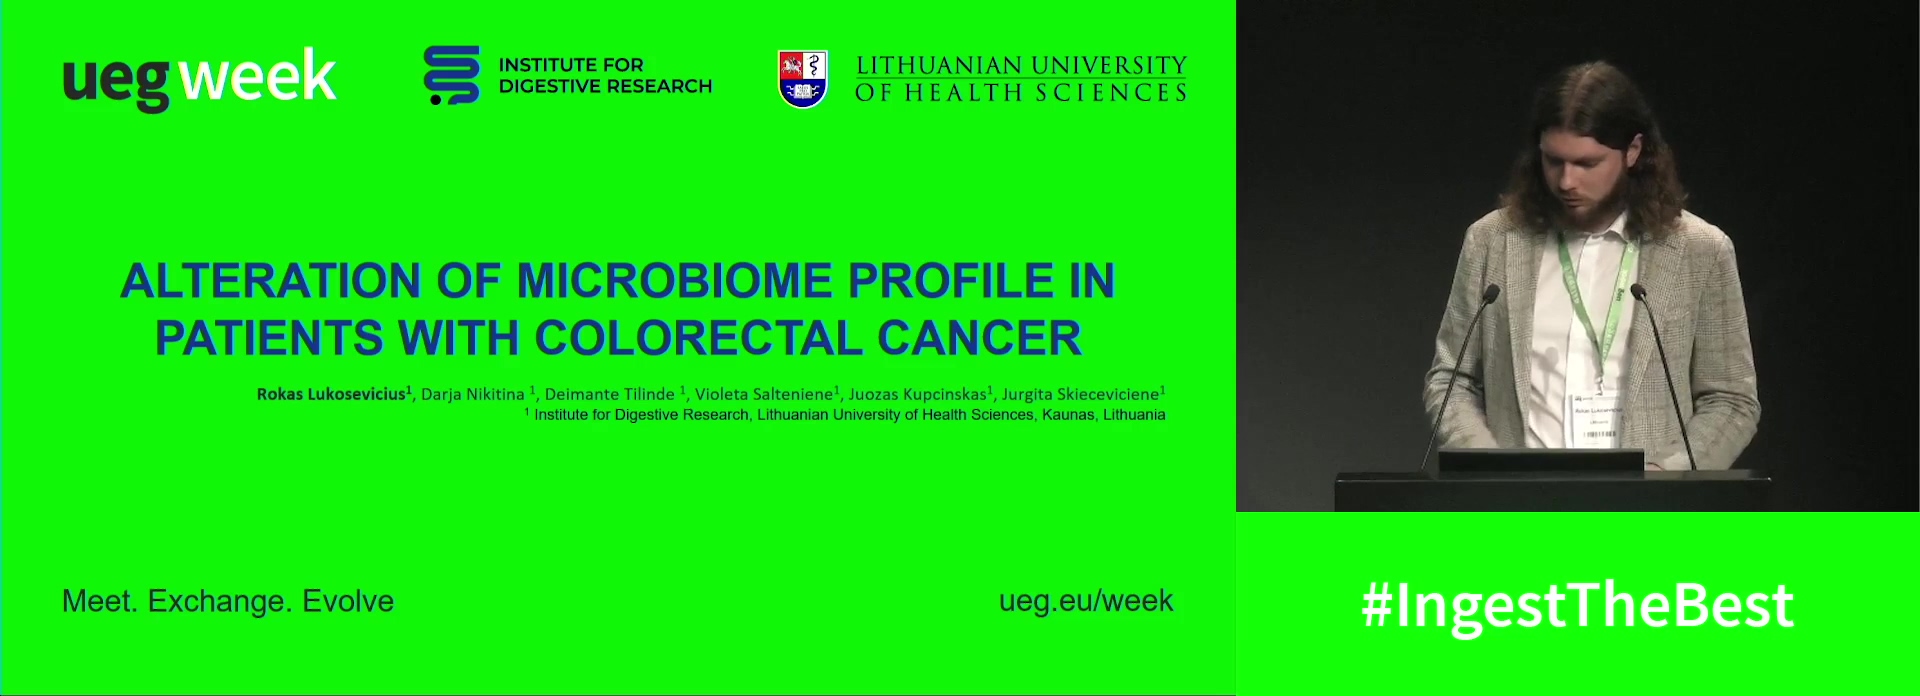 ALTERATION OF MICROBIOME PROFILE IN PATIENTS WITH COLORECTAL CANCER